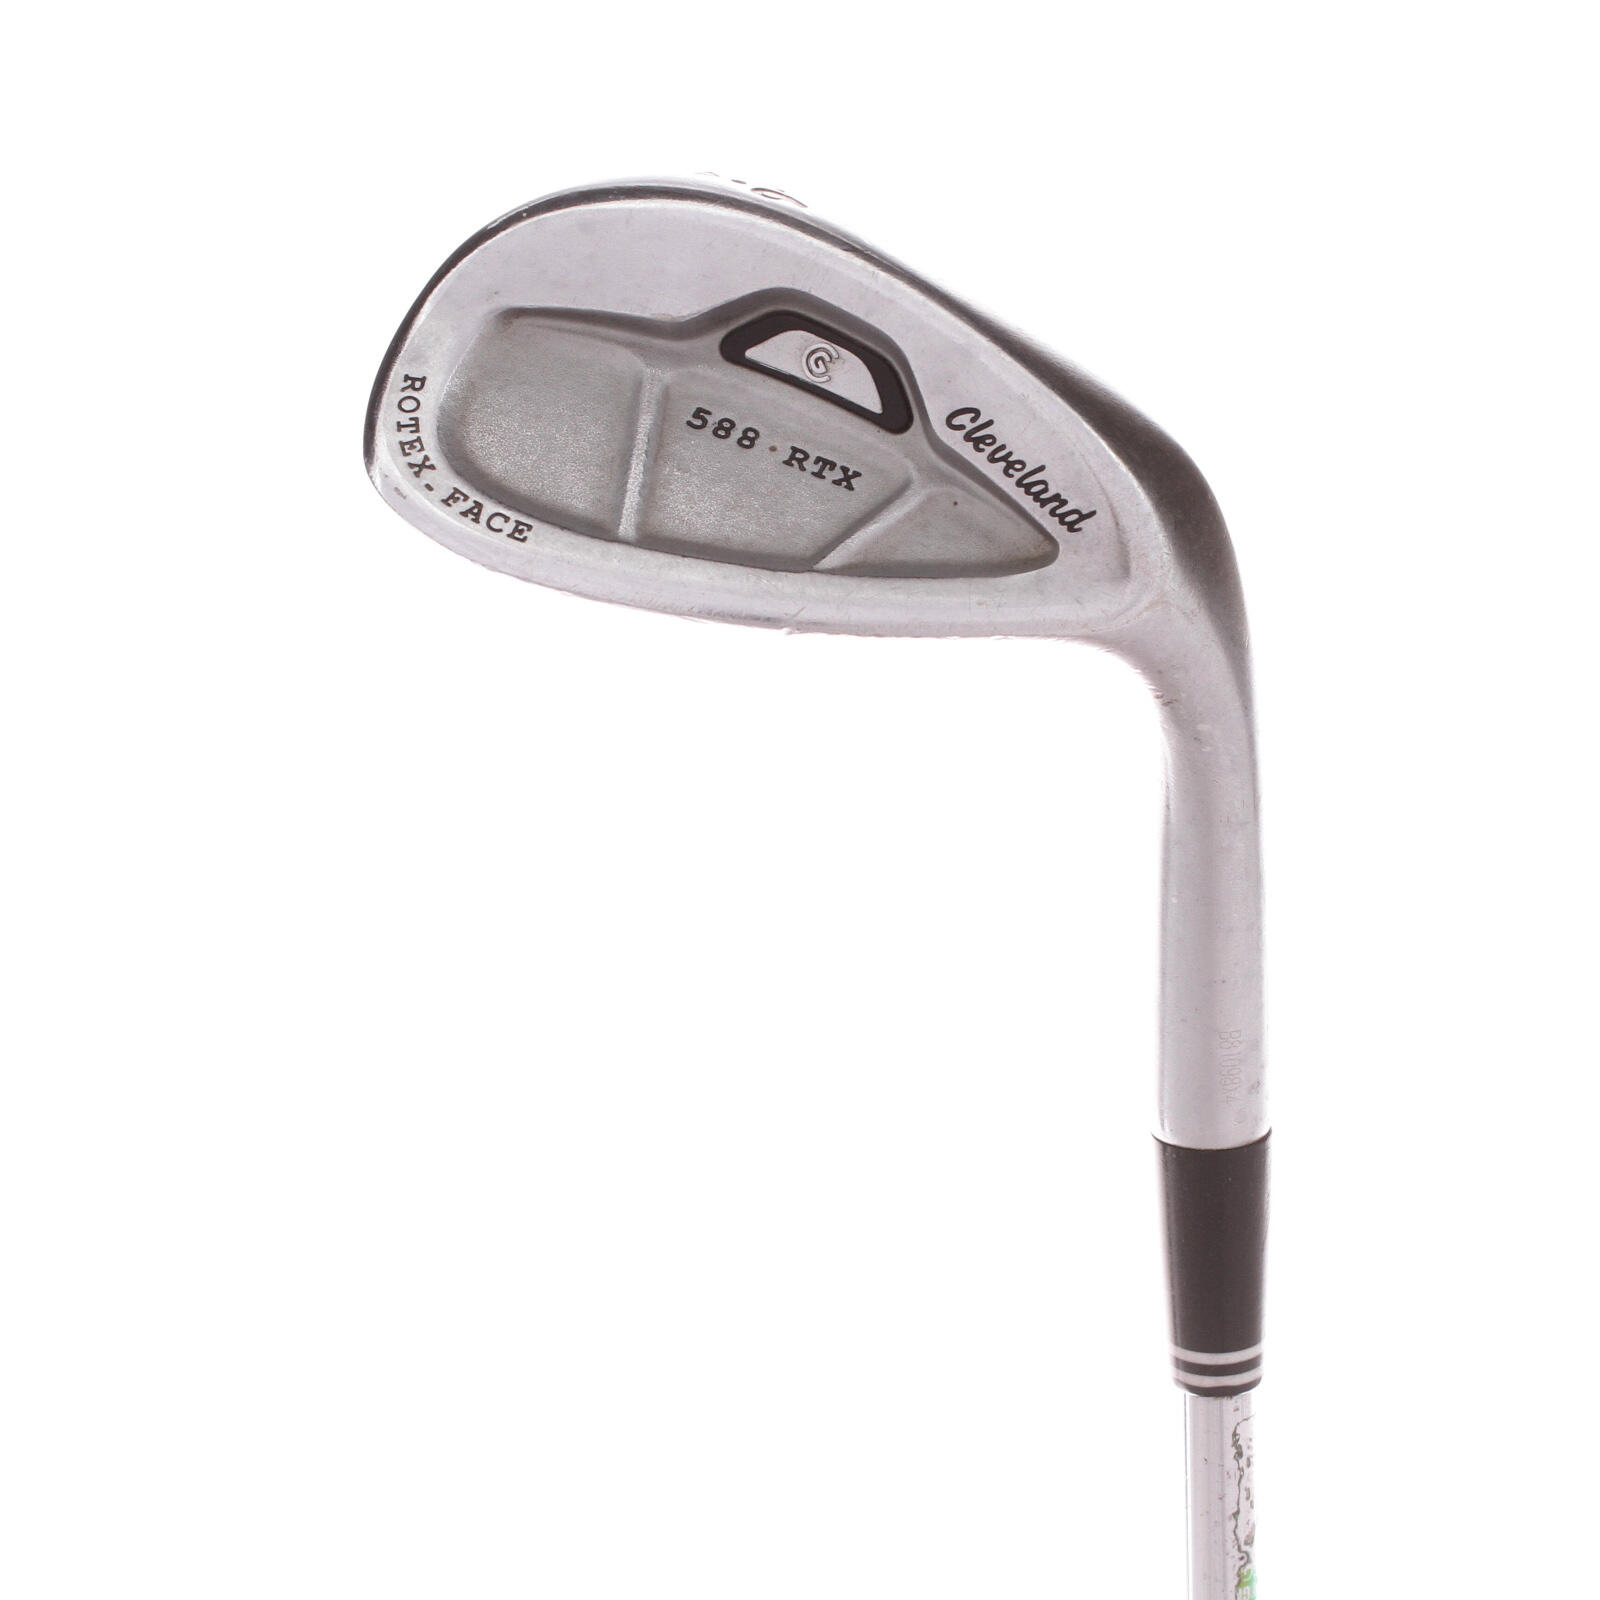 CLEVELAND GOLF USED - Sand Wedge Cleveland 588-TRX 56 Degree Steel Shaft Right Handed - GRADE C